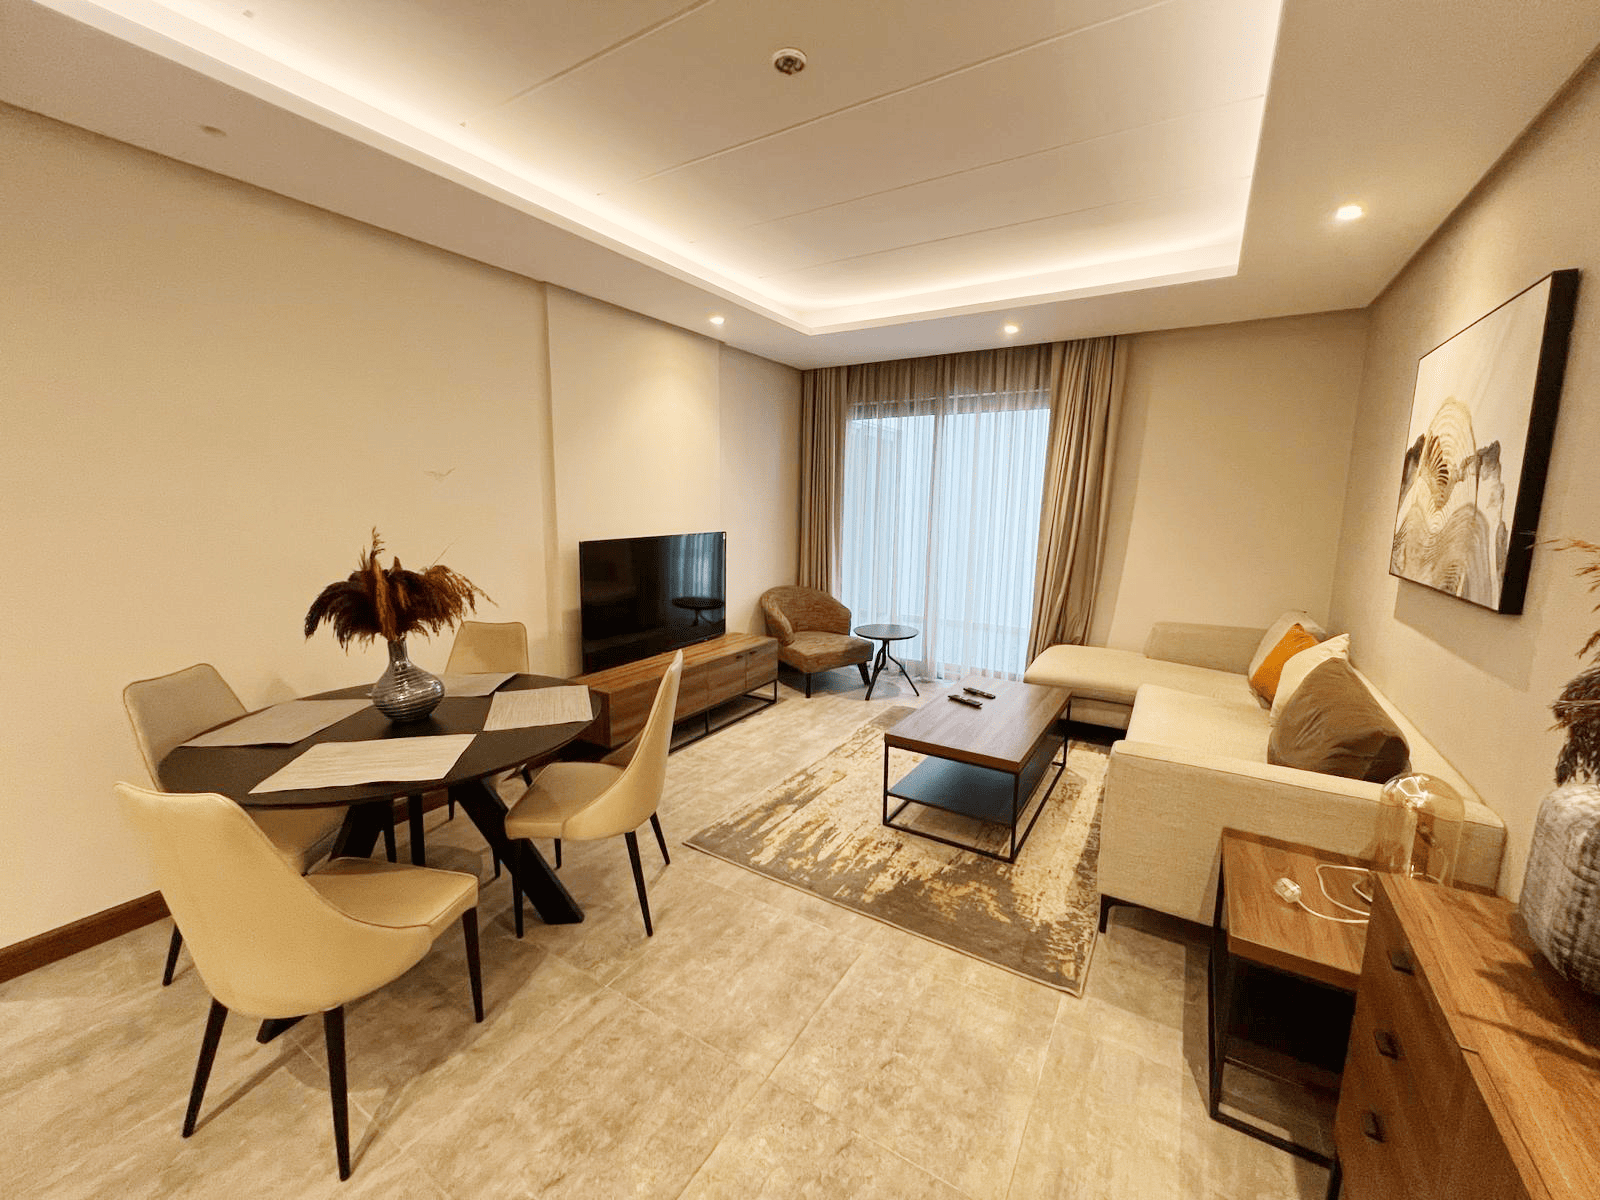 A luxury modern apartment with a fully furnished living room and dining area.